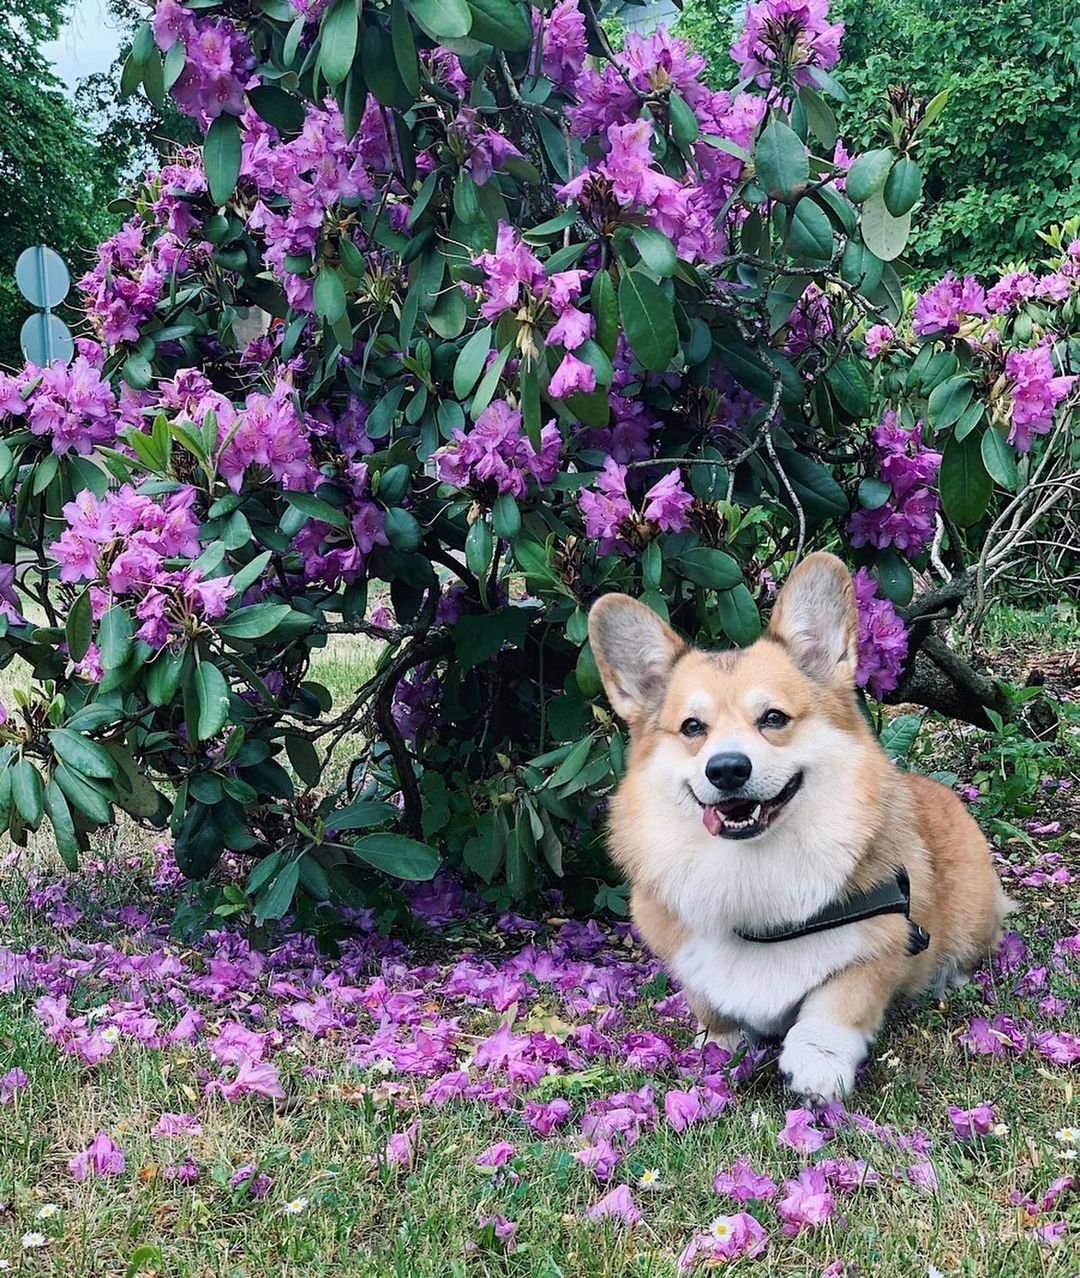 17 Amazing Facts About Corgis You Might Not Know - PetTime